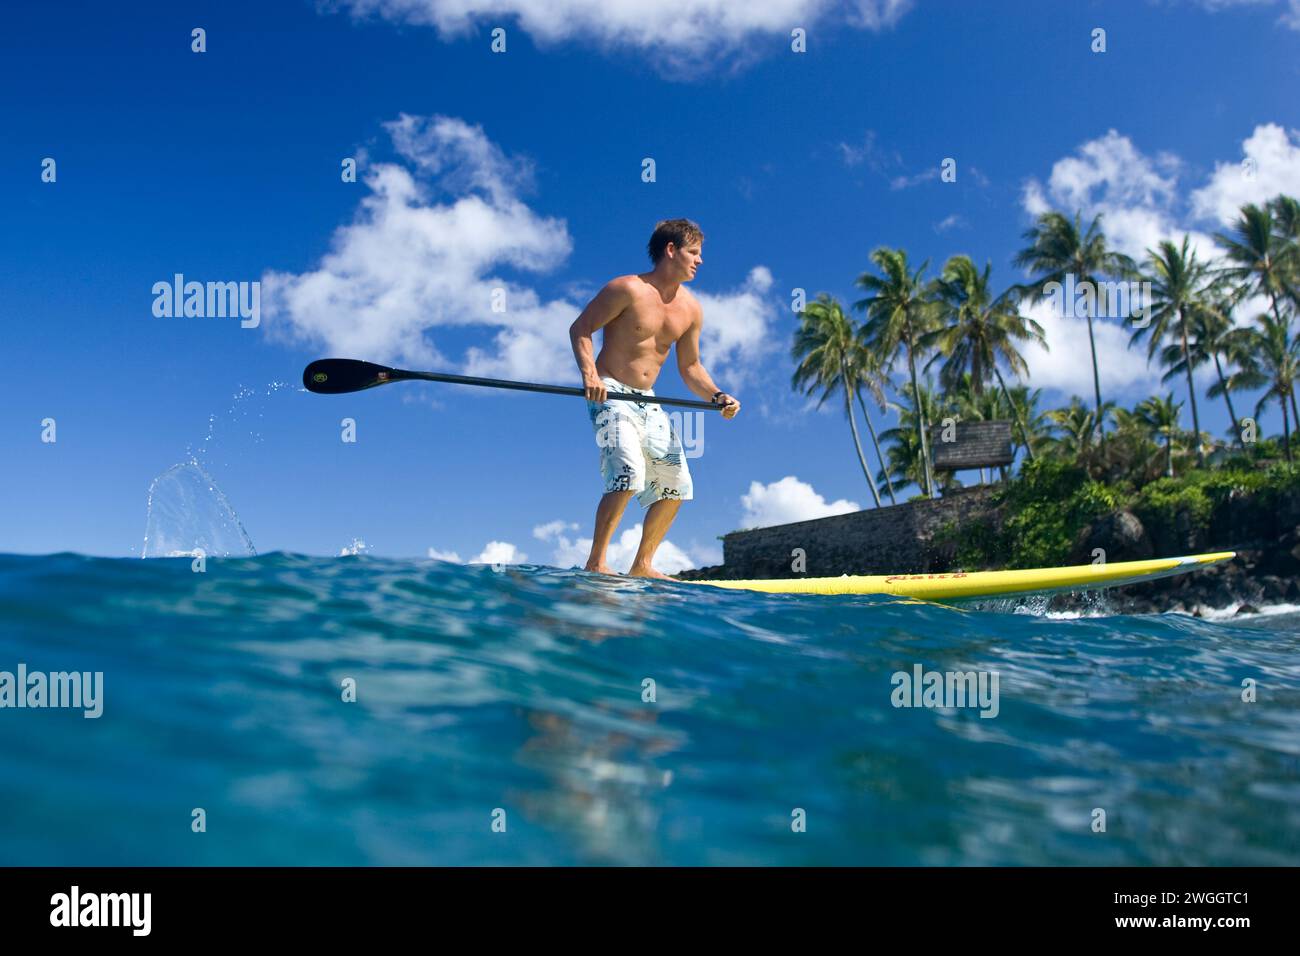 Stand-Up-Paddle-Surfen Stockfoto